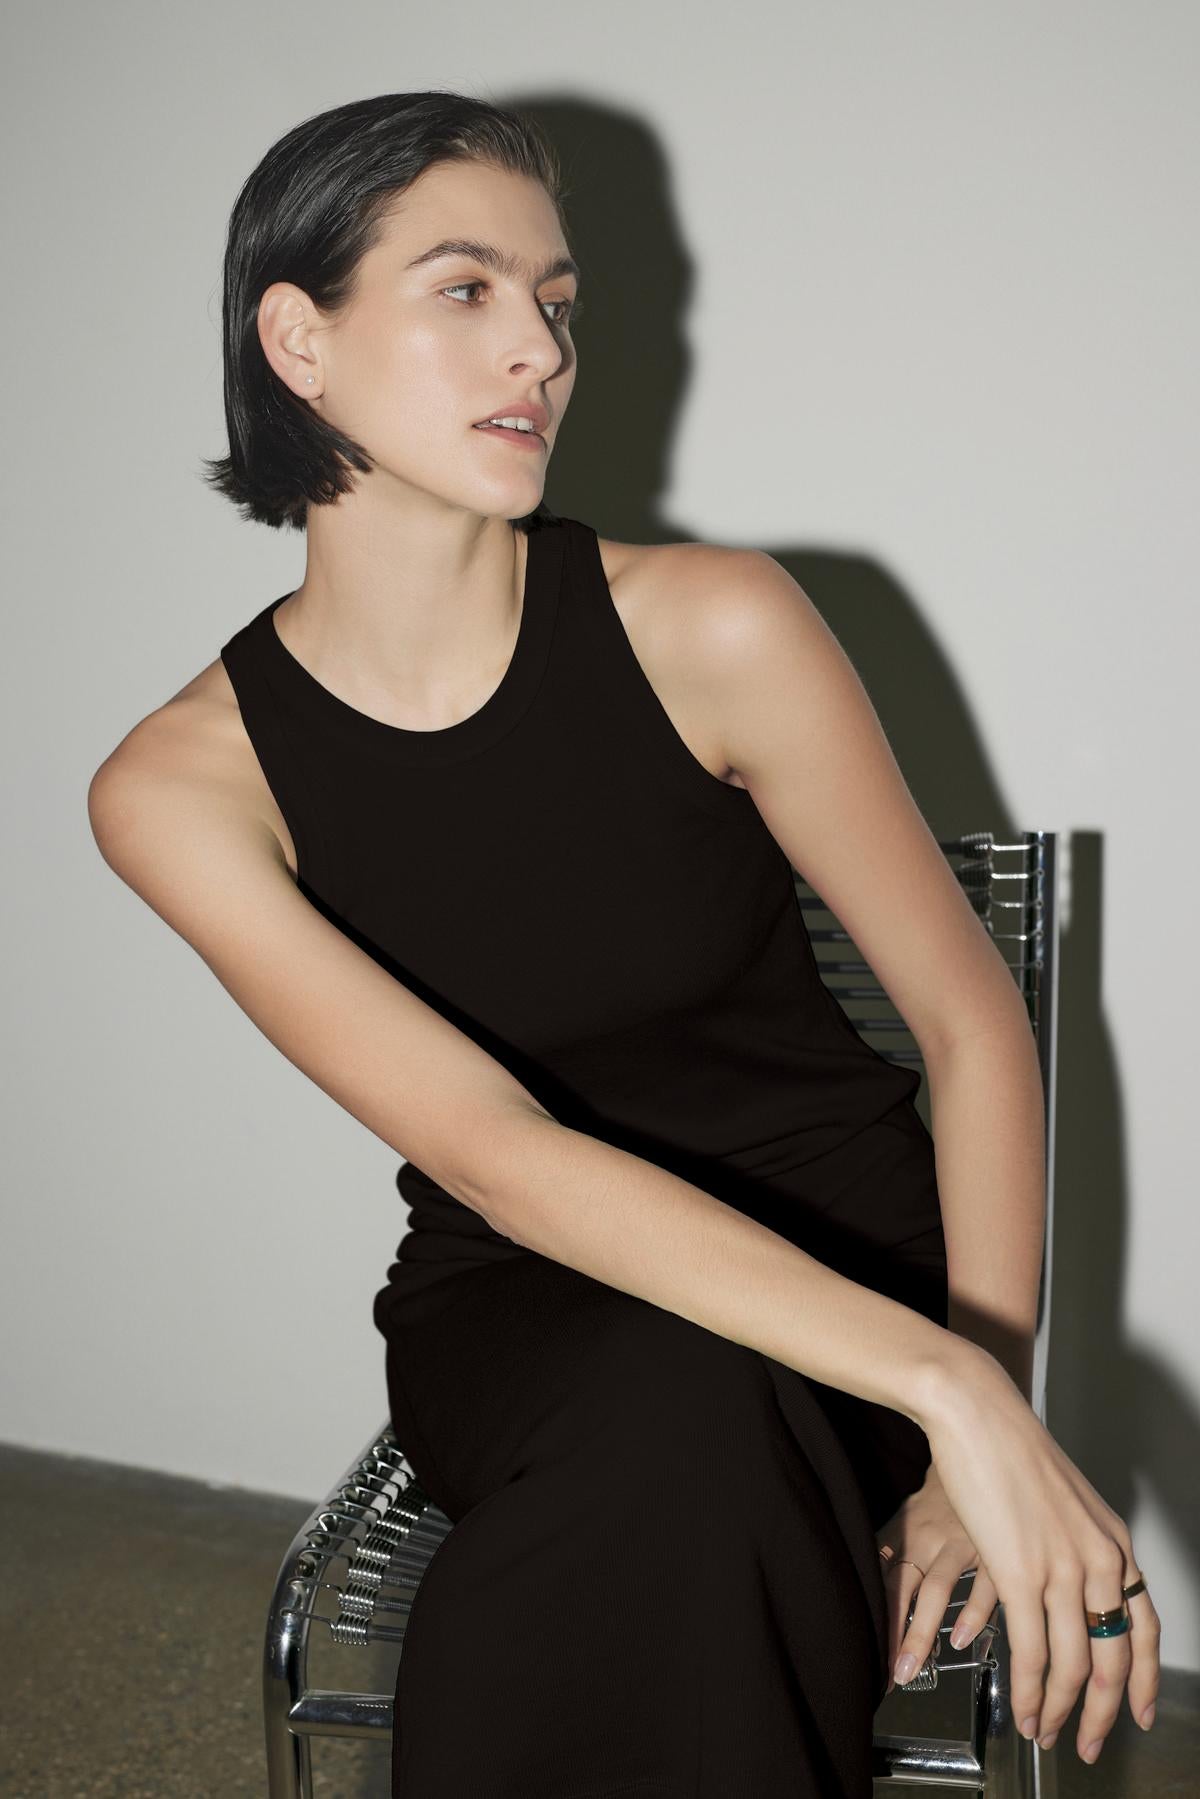 A woman with short dark hair sits on a metal chair, wearing the Velvet by Jenny Graham Griffith Dress, a black sleeveless top with a crew neckline, looking to the side in a neutral indoor setting.-36891634303169